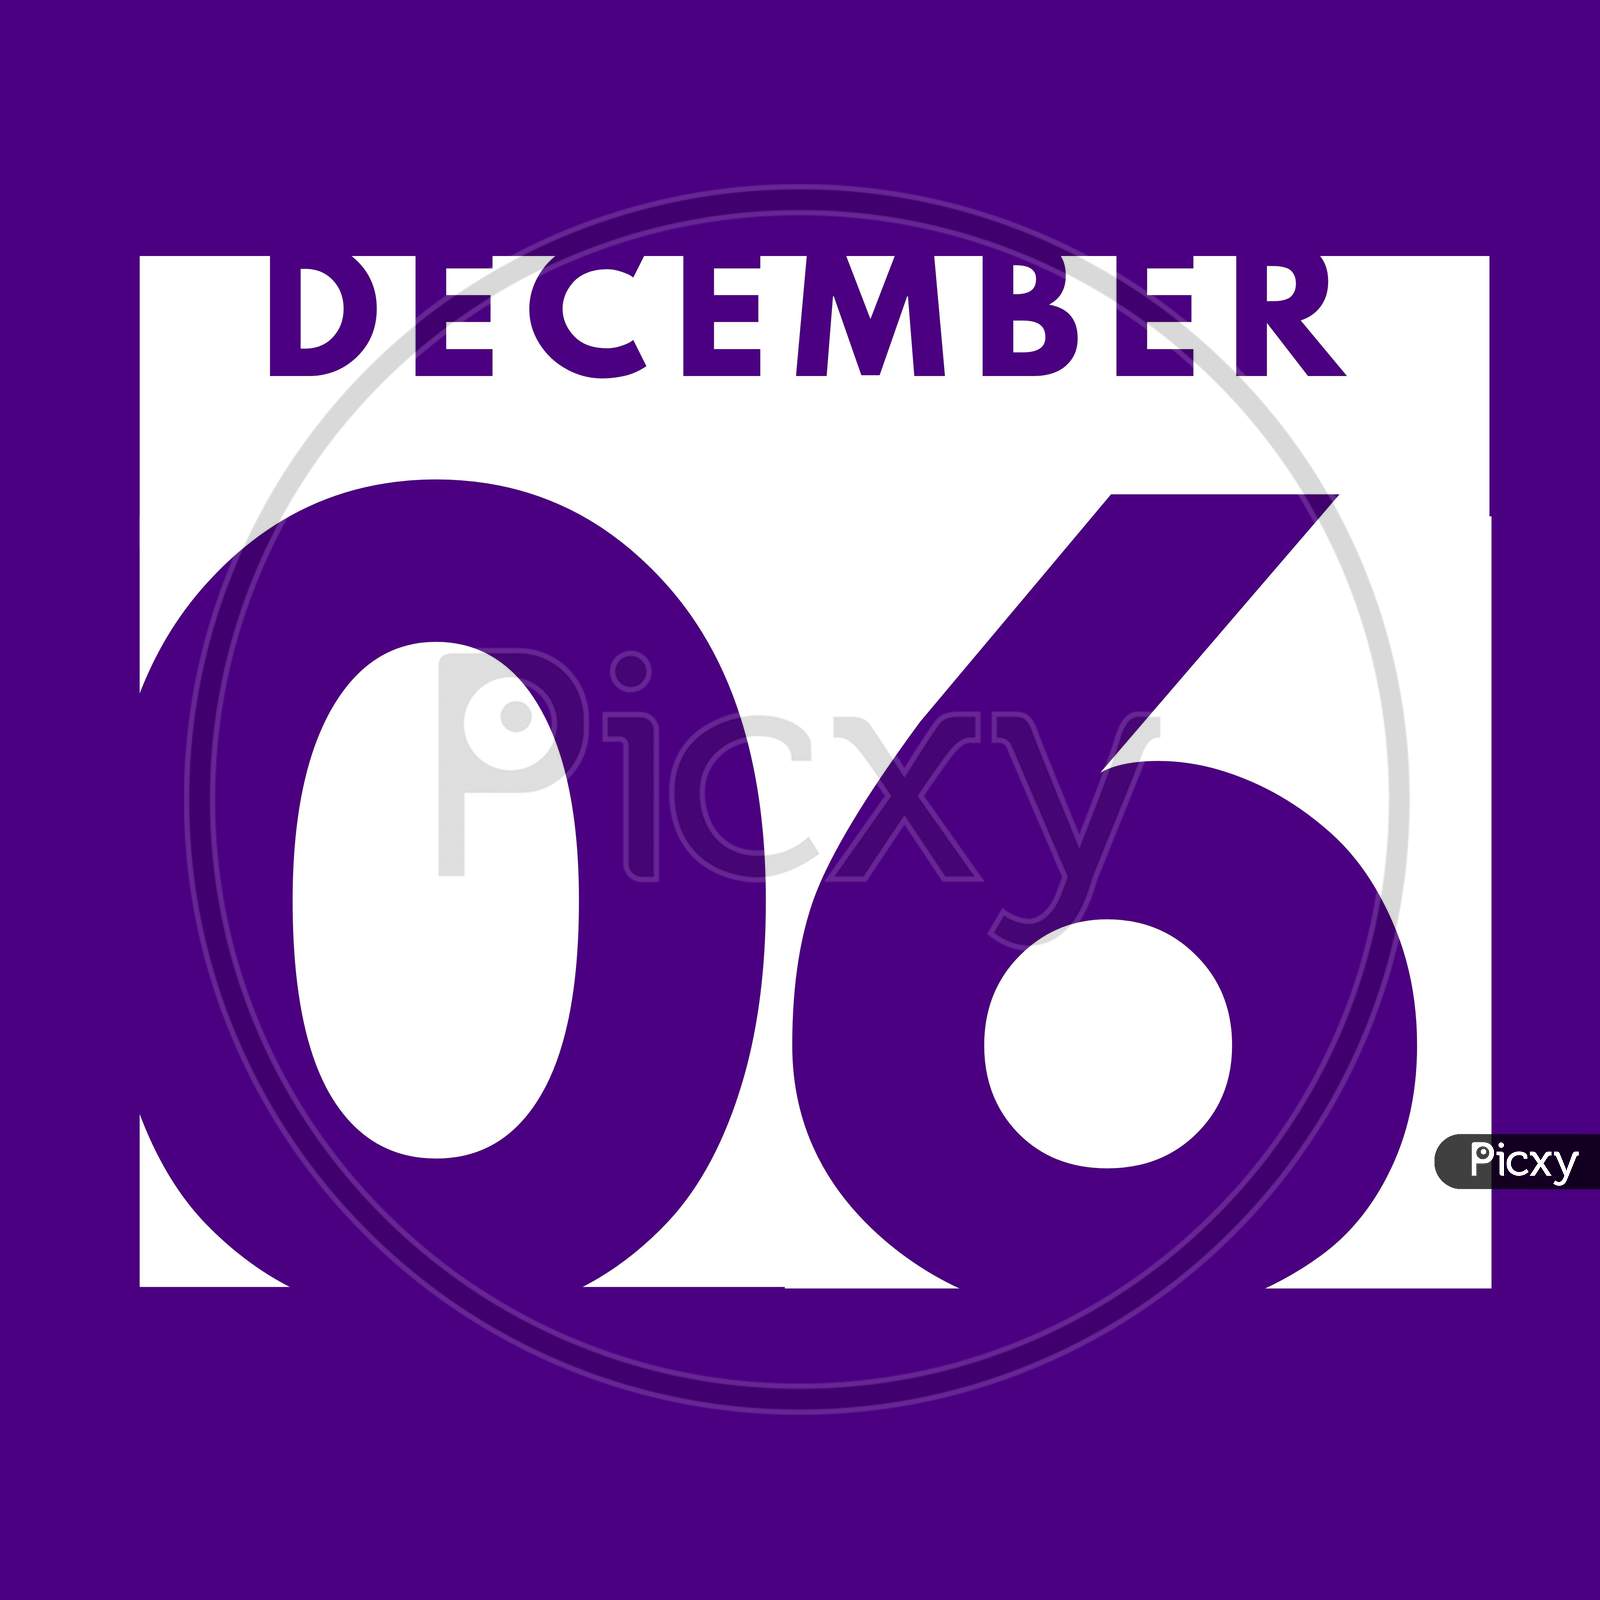 December 6 . Flat Modern Daily Calendar Icon .Date ,Day, Month .Calendar For The Month Of December